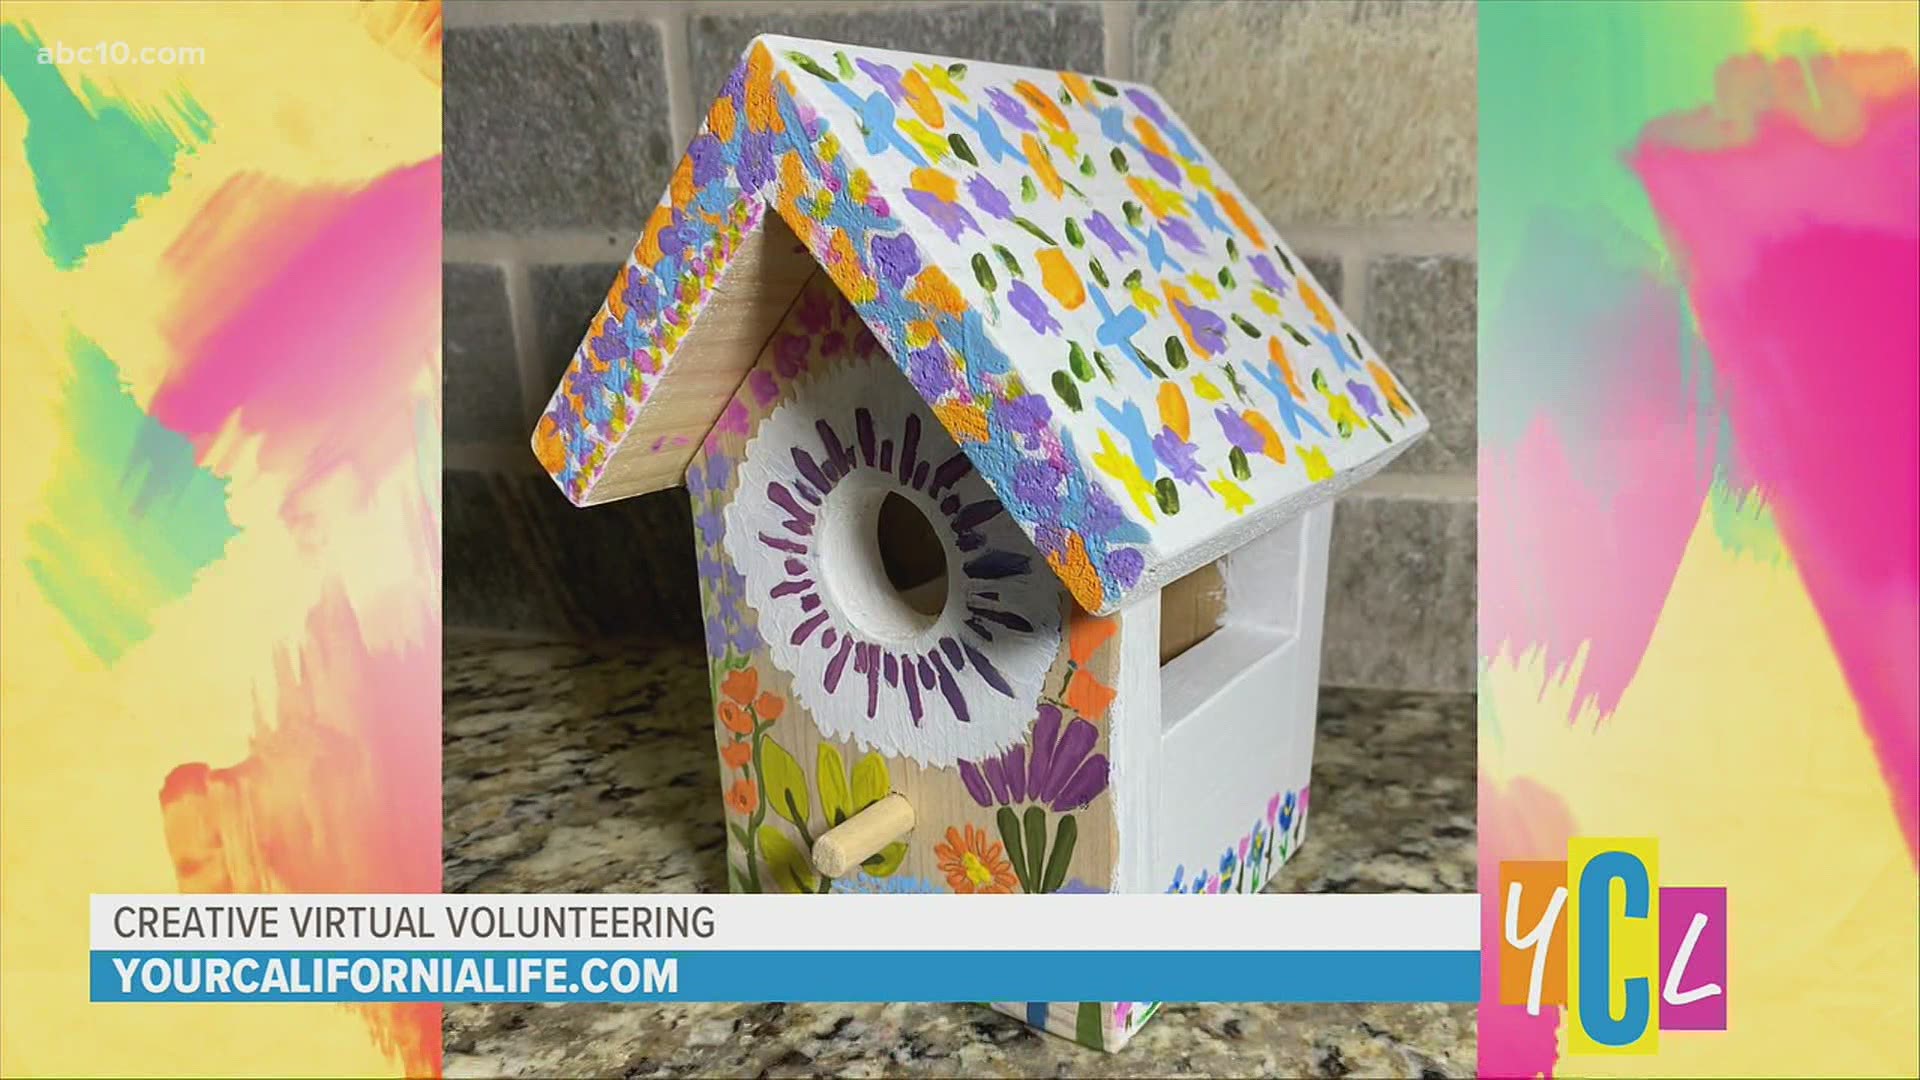 Volunteer deliver handmade birdhouses to the shelves of Habitat for Humanity of Greater Sacramento’s ReStore shop to help raise funds for local building projects.